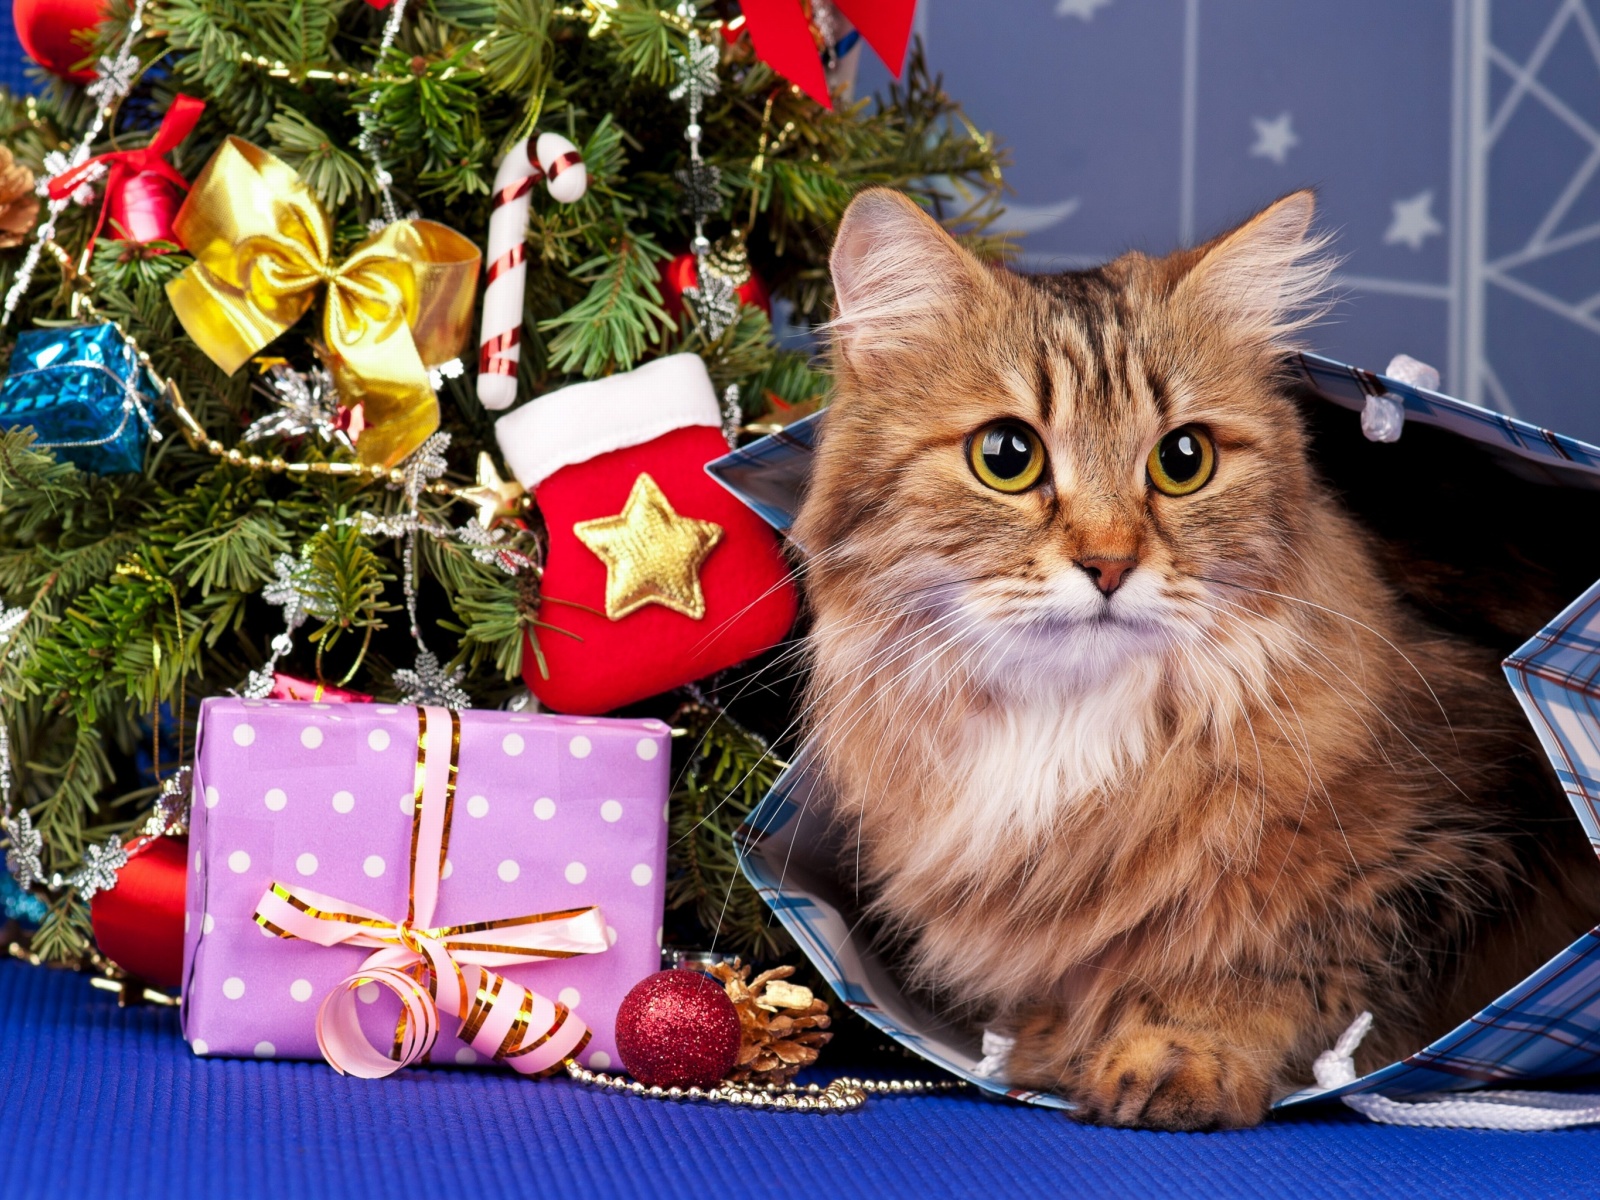 Merry Christmas Cards Wishes with Cat screenshot #1 1600x1200